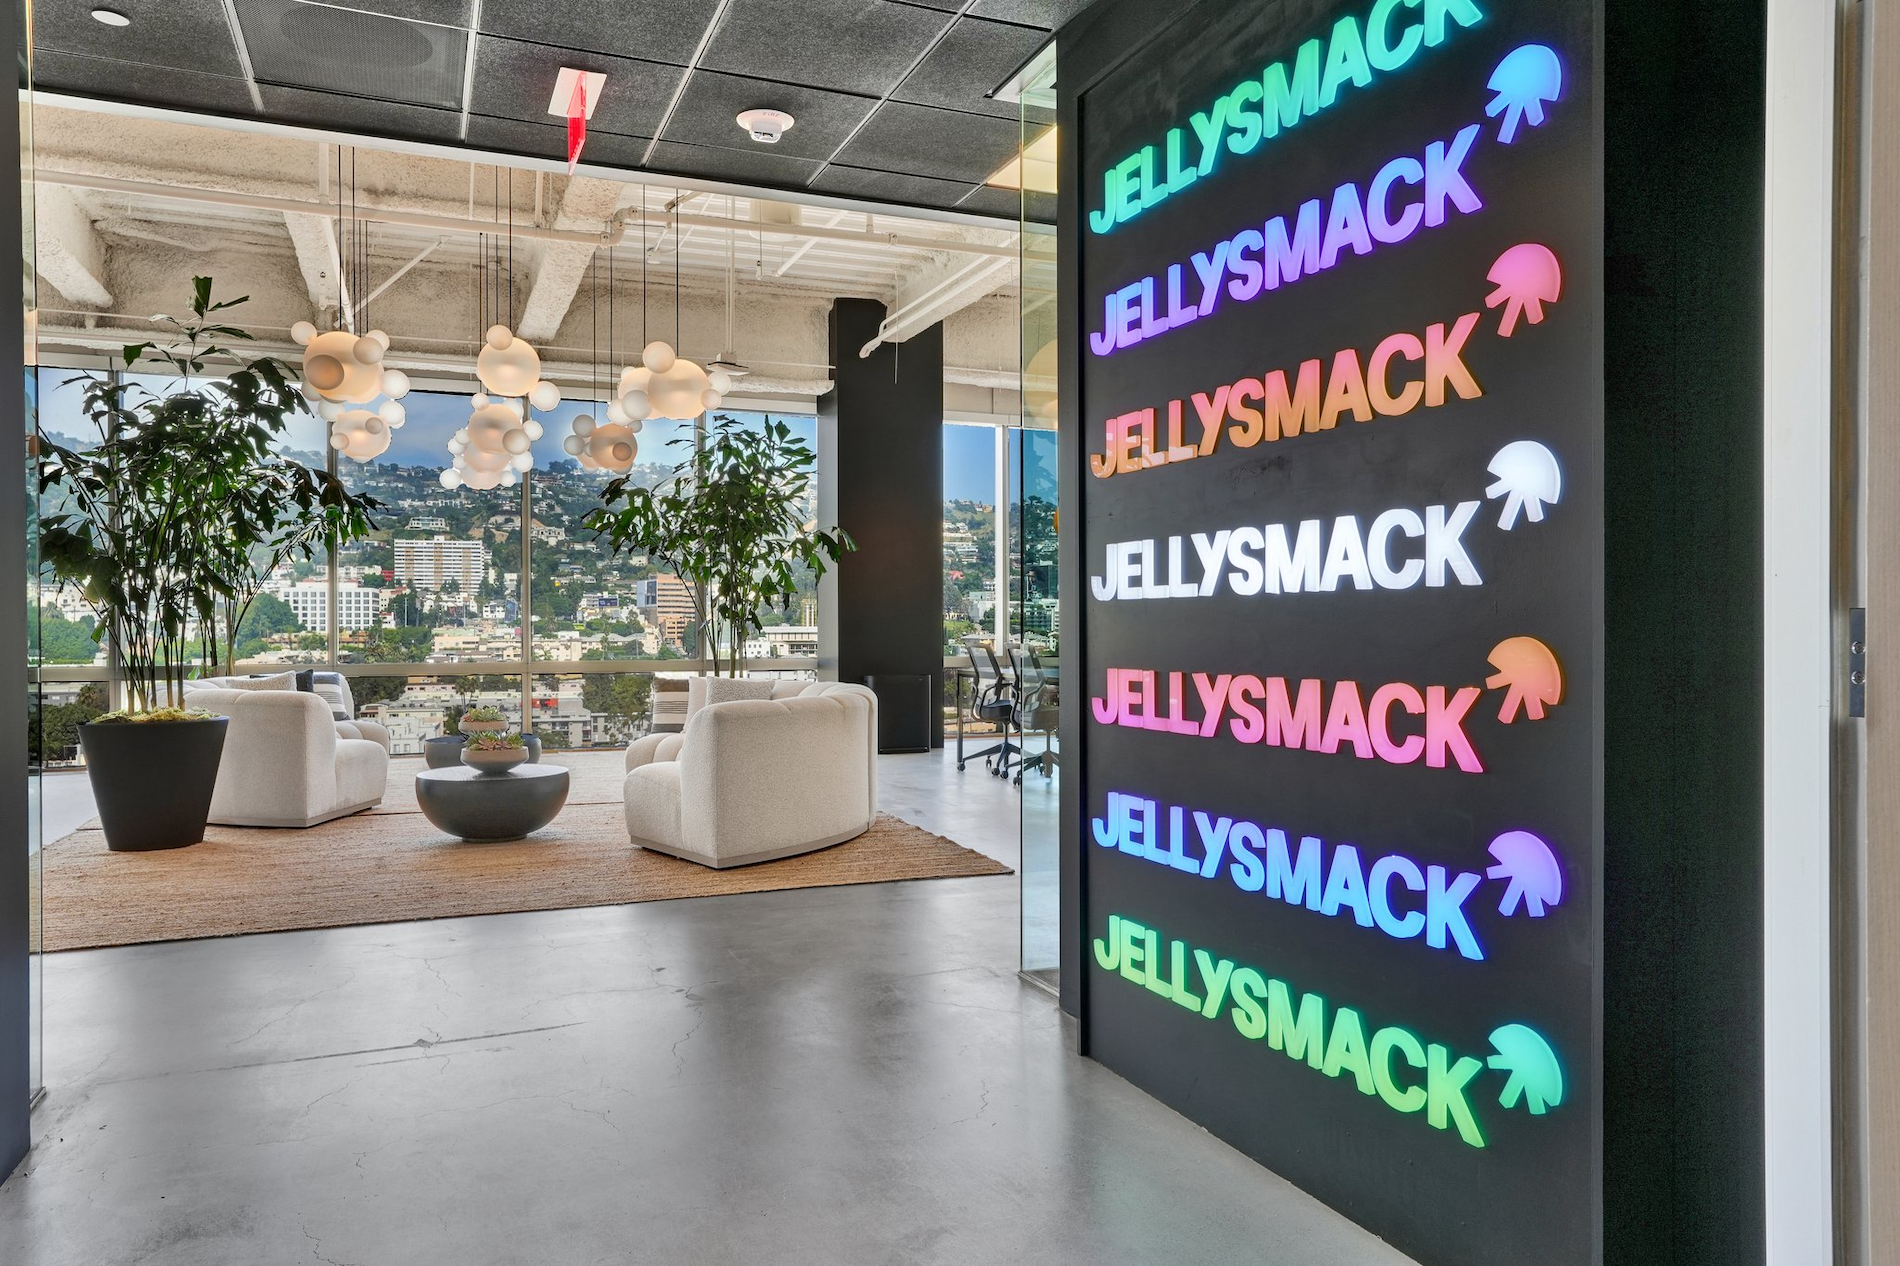 jellysmack office the logo runs up and down the wall to the right and we can see a beautifully designed seating area in the background with white furniture and indoor plants